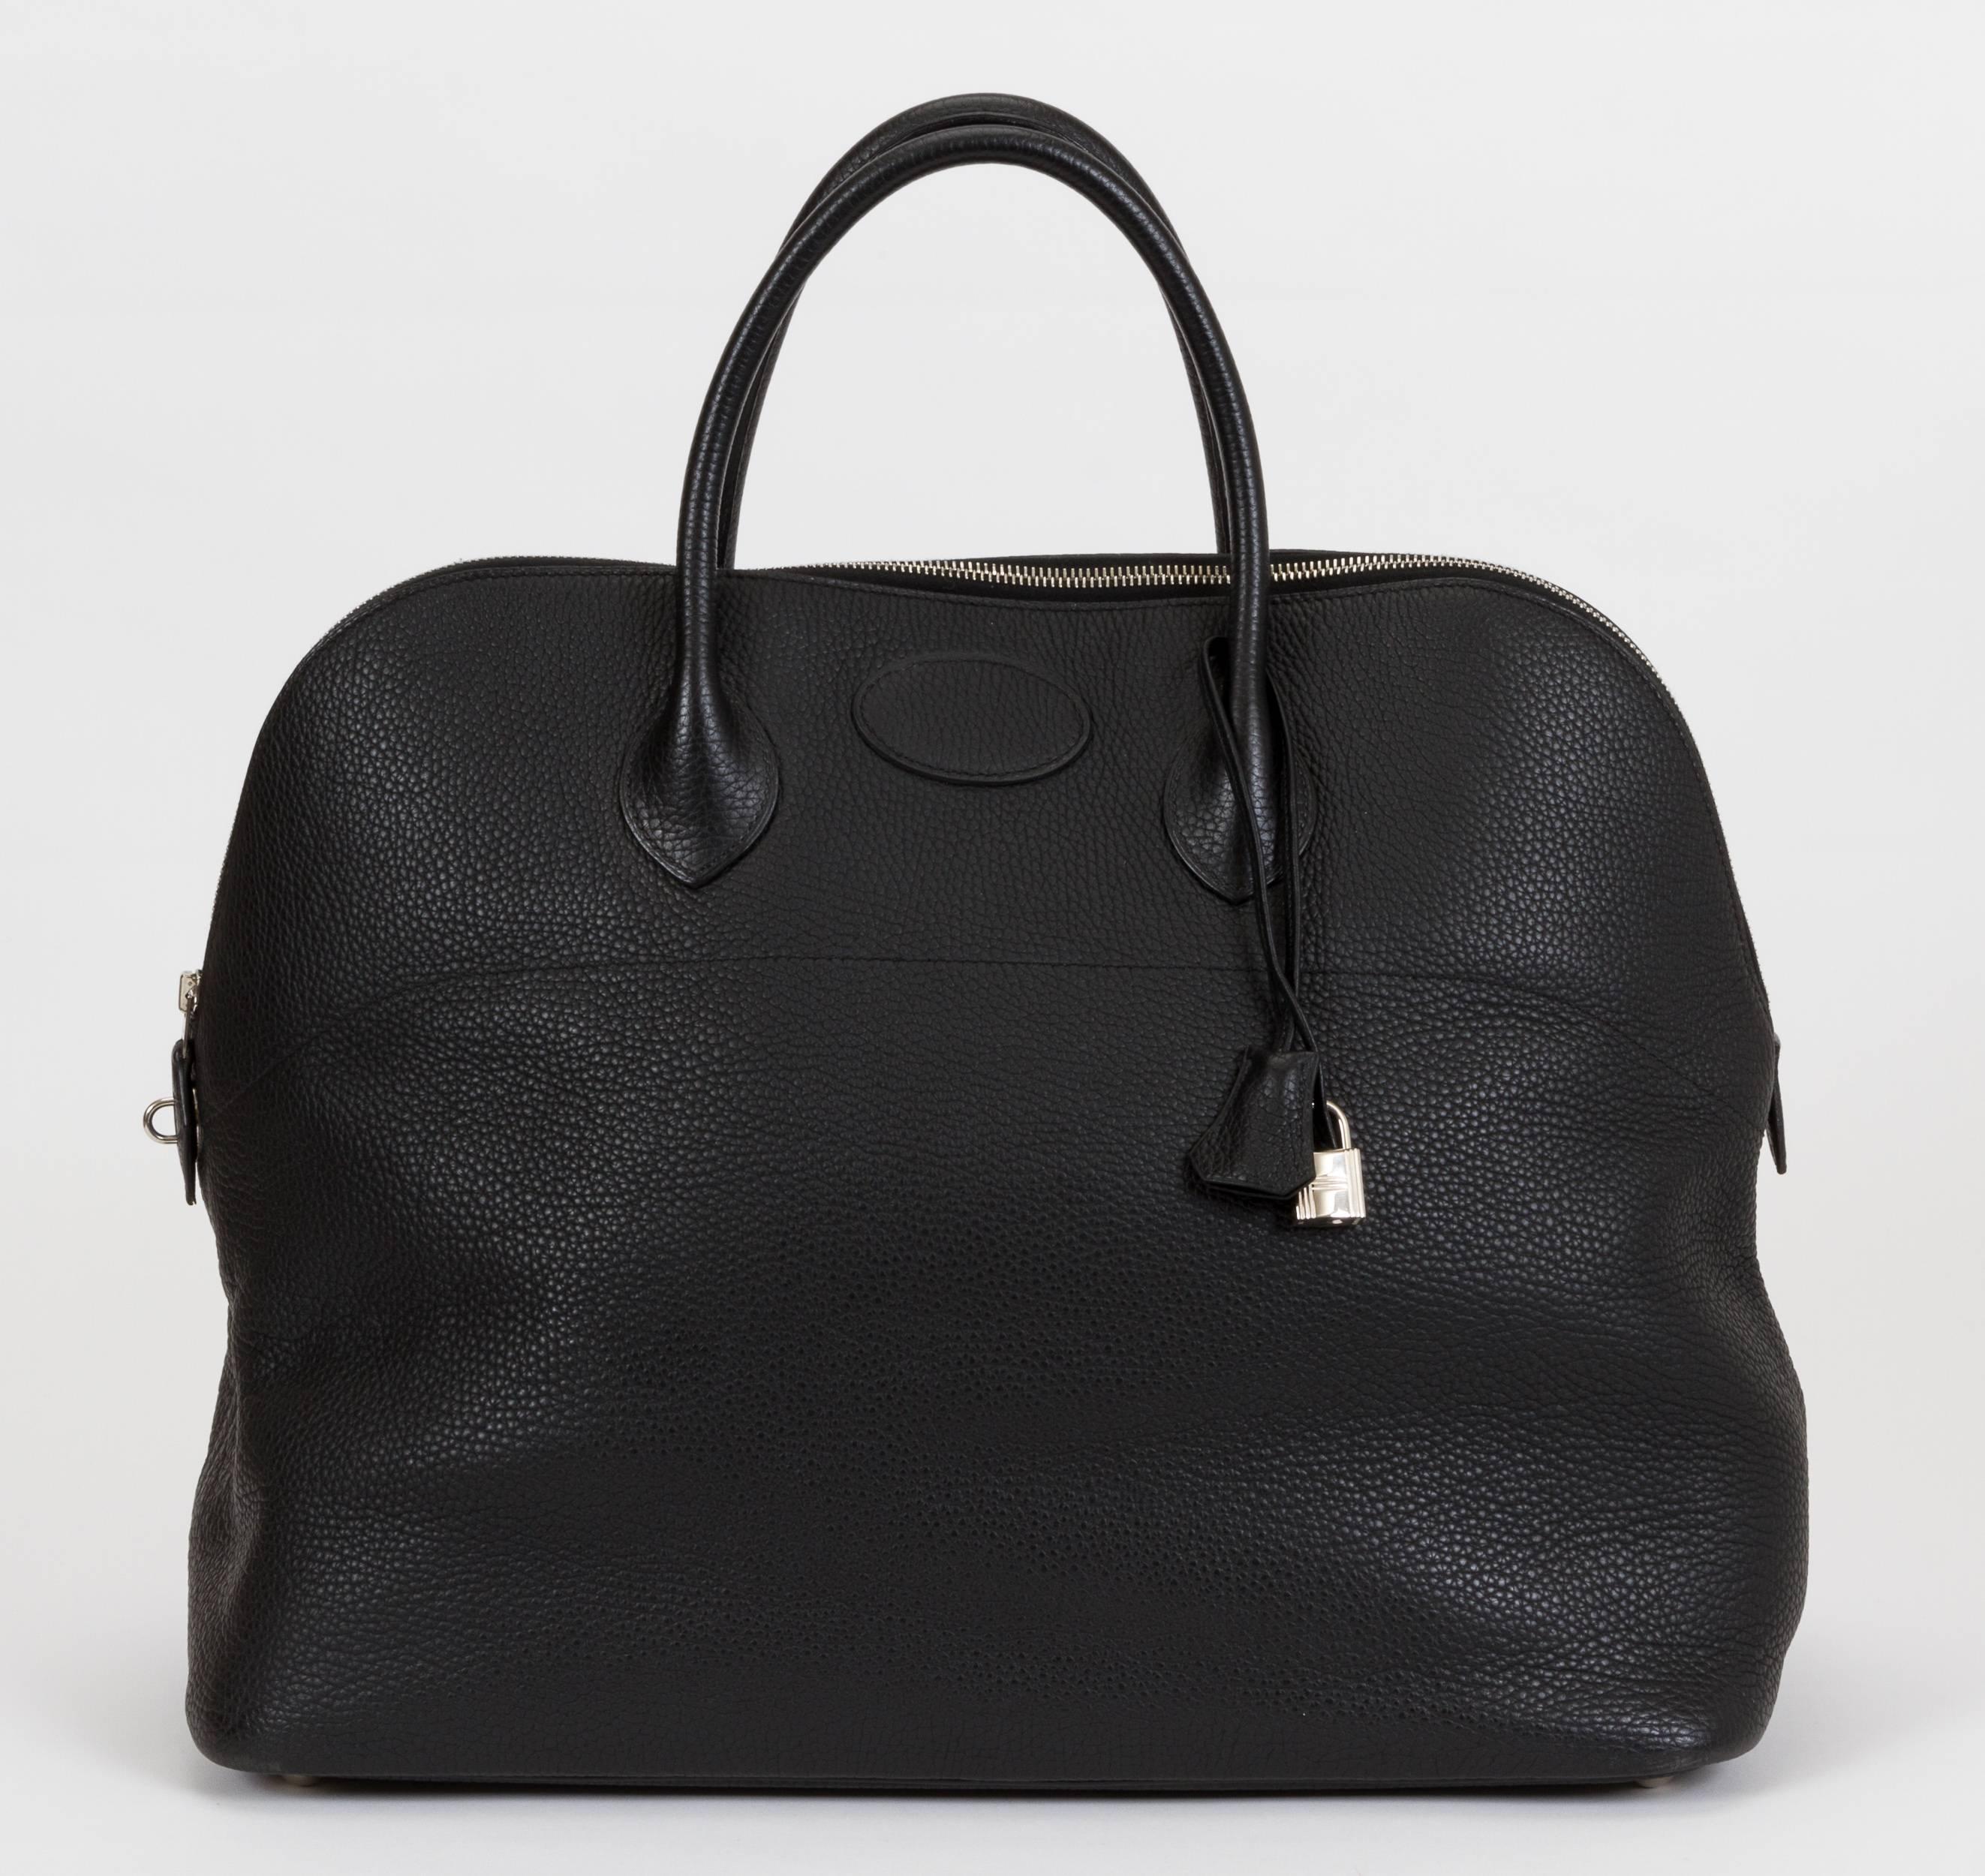 Hermès extra-large travel bolide in black Togo leather with palladium hardware and toile interior. Date stamp J for 2006. Comes with clochette, tirette, and original dust cover. Minor wear.